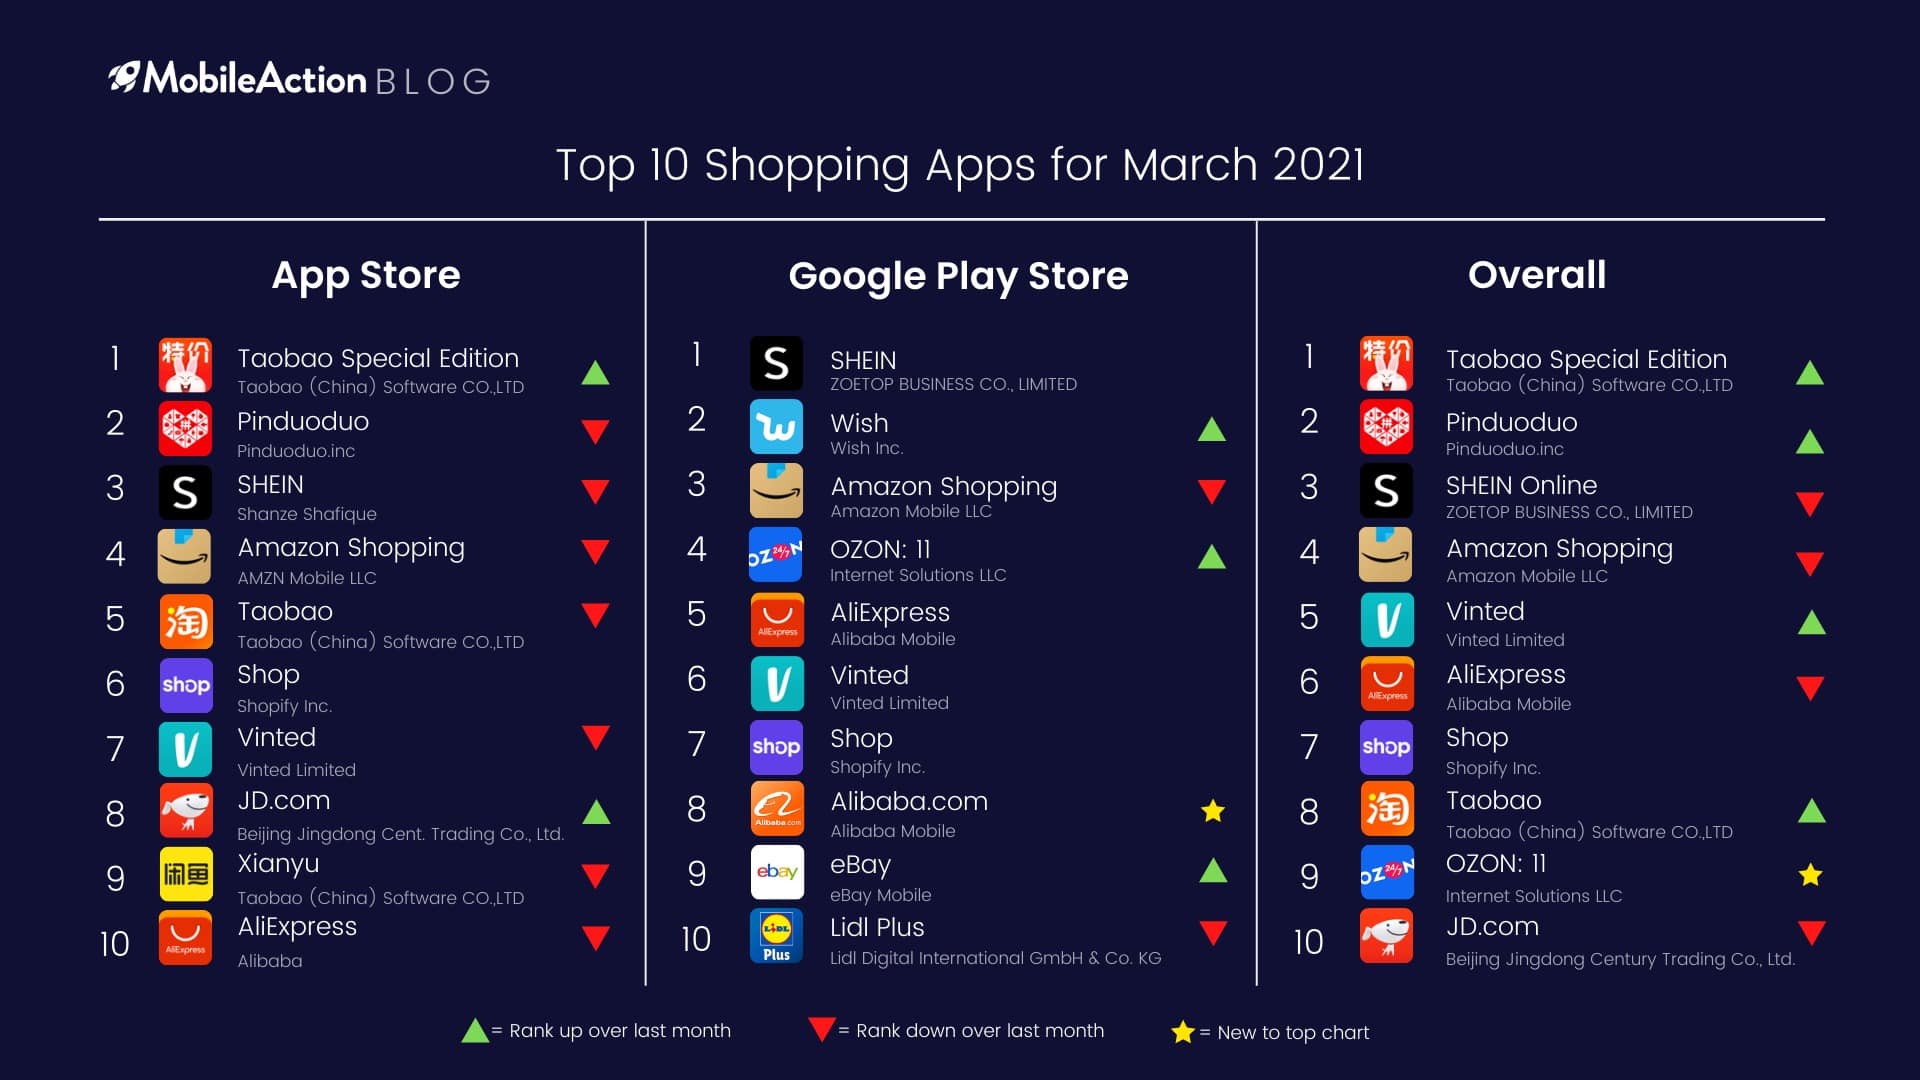 Top 10 Shopping Apps for March 2021